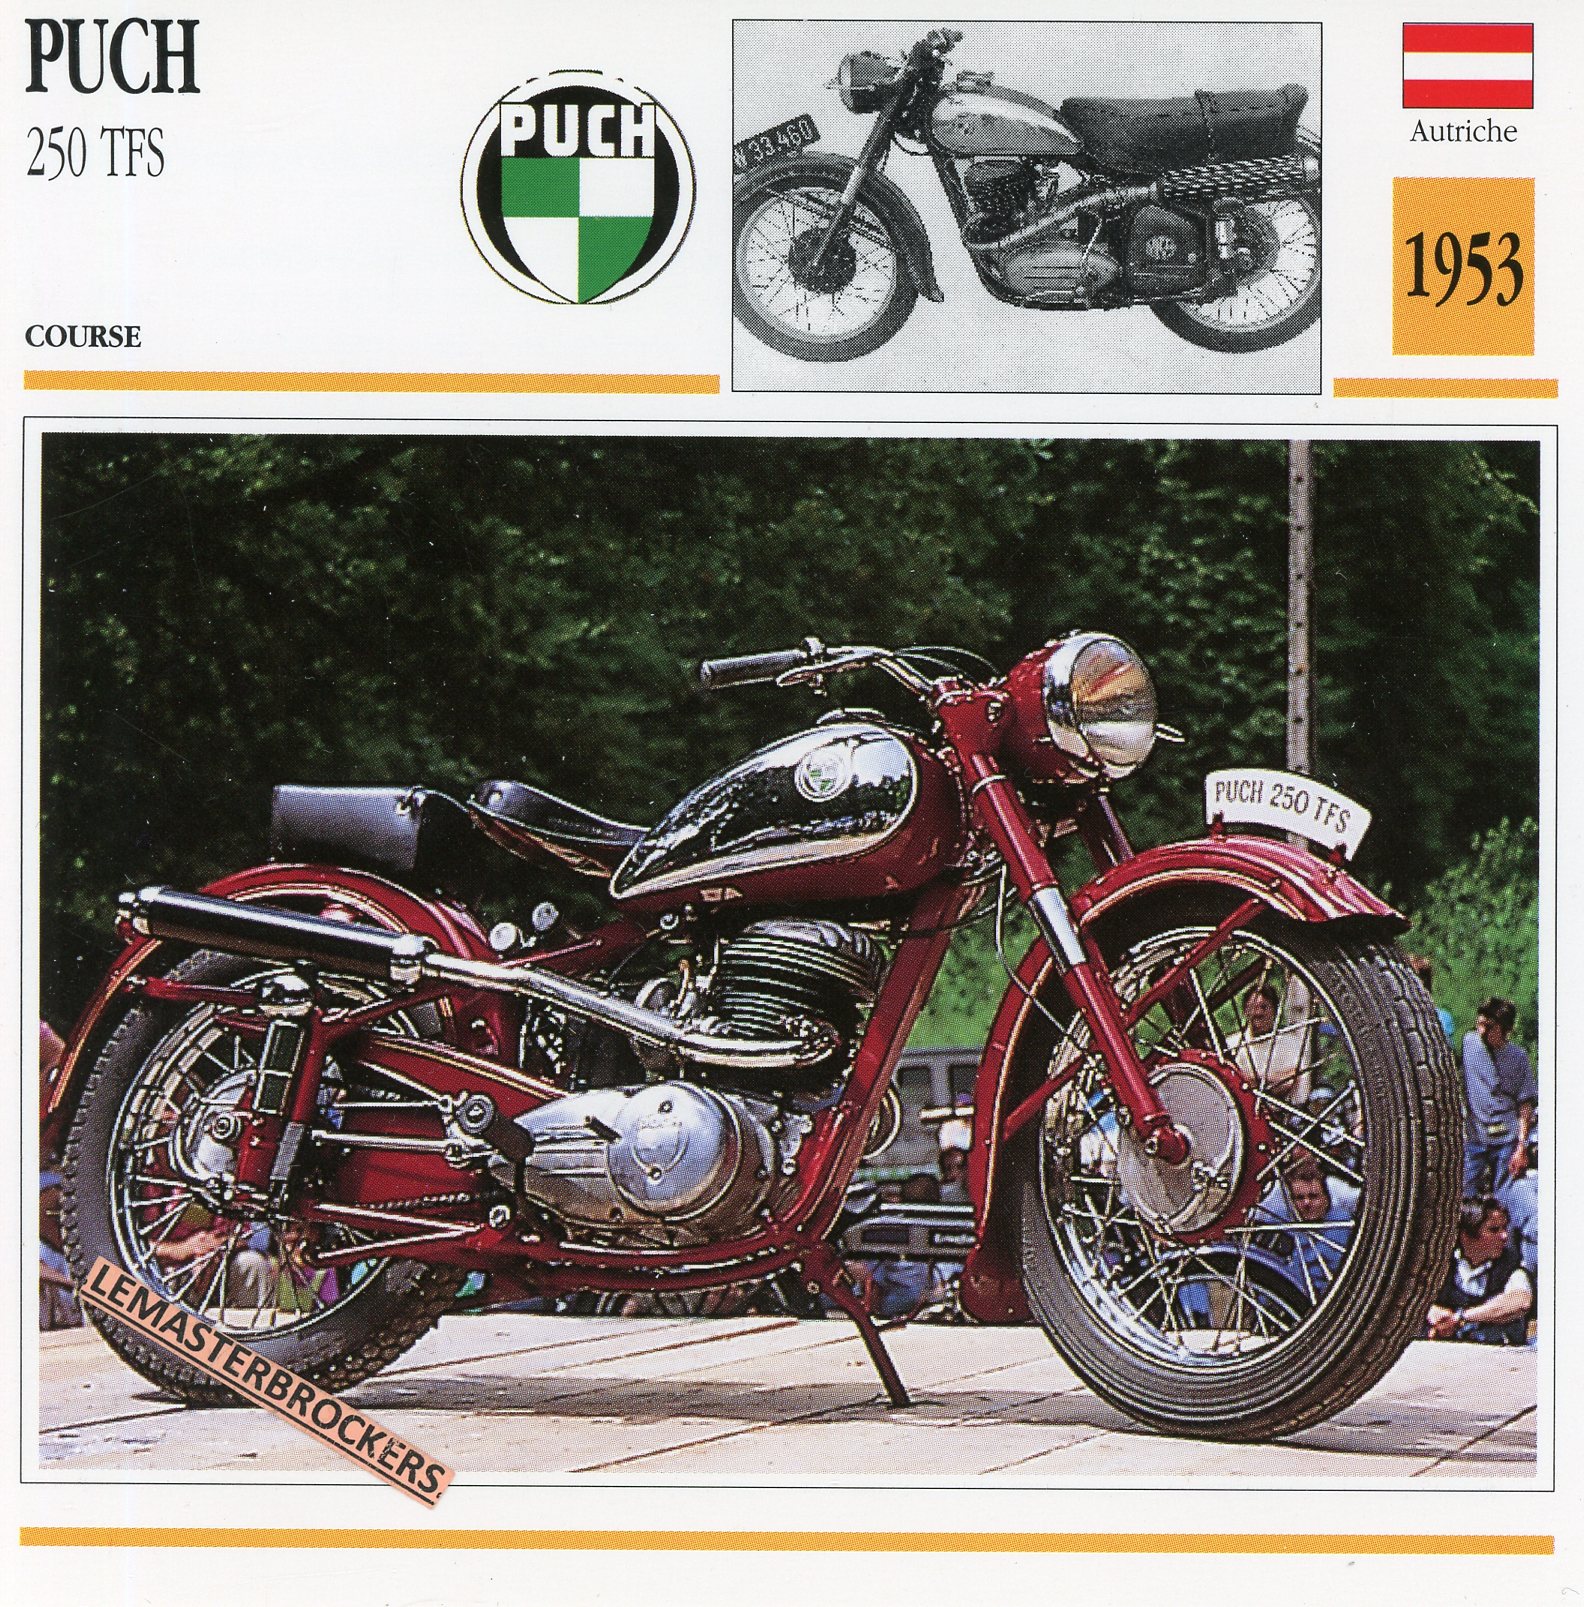 PUCH-250-TFS-1953-FICHE-SCOOTER-MOTORCYCLE-CARDS-ATLAS-LEMASTERBROCKERS